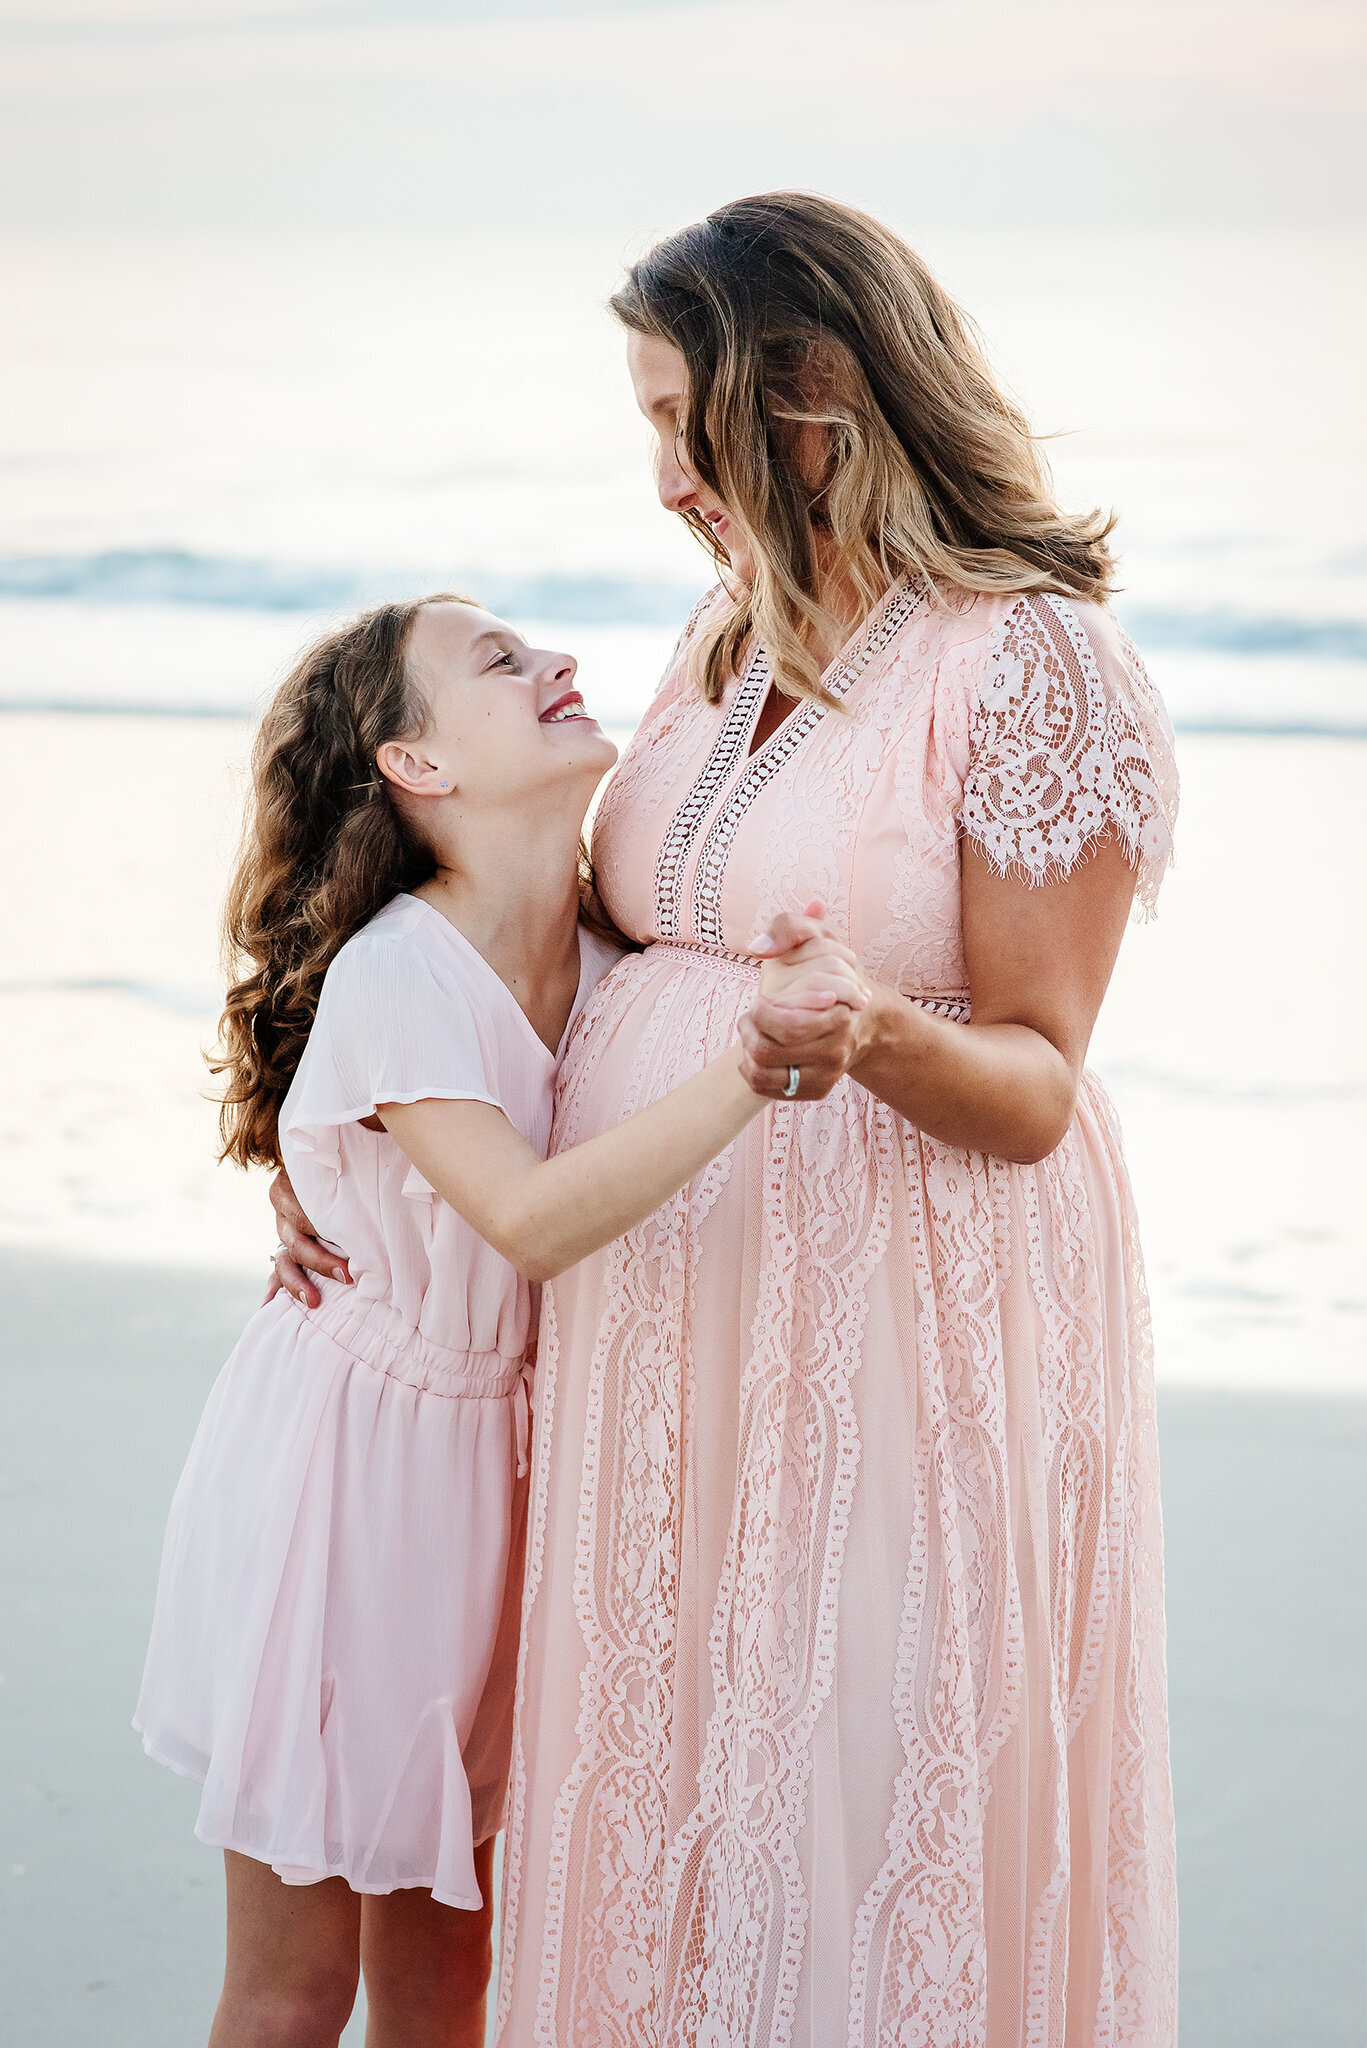 Expectant mom and daughter in pink dresses dance at Atlantic Beach, FL.